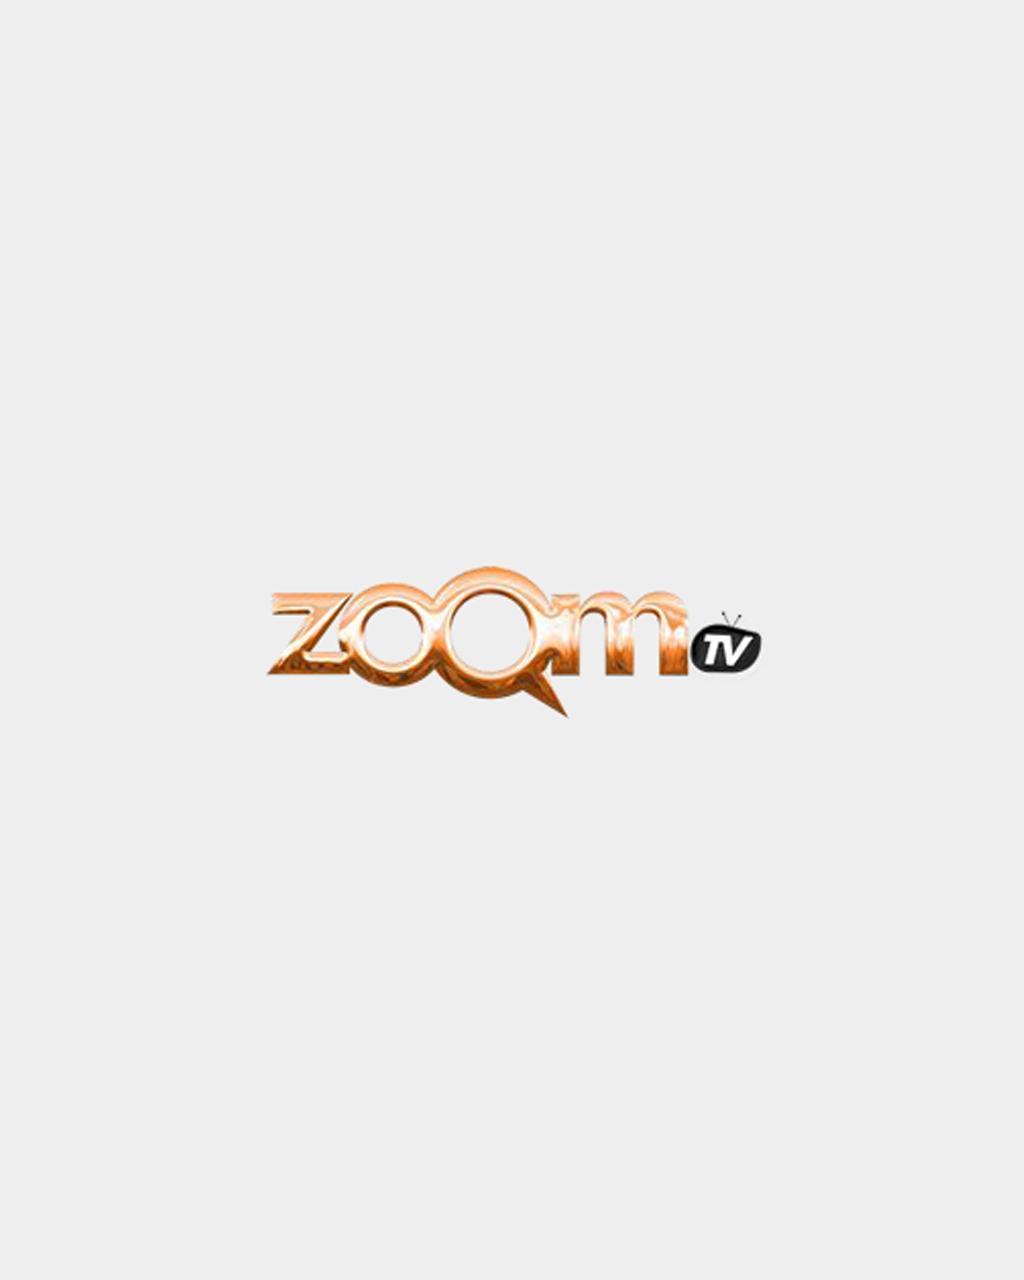 Zoomtv Logo - ZoomTV for Android